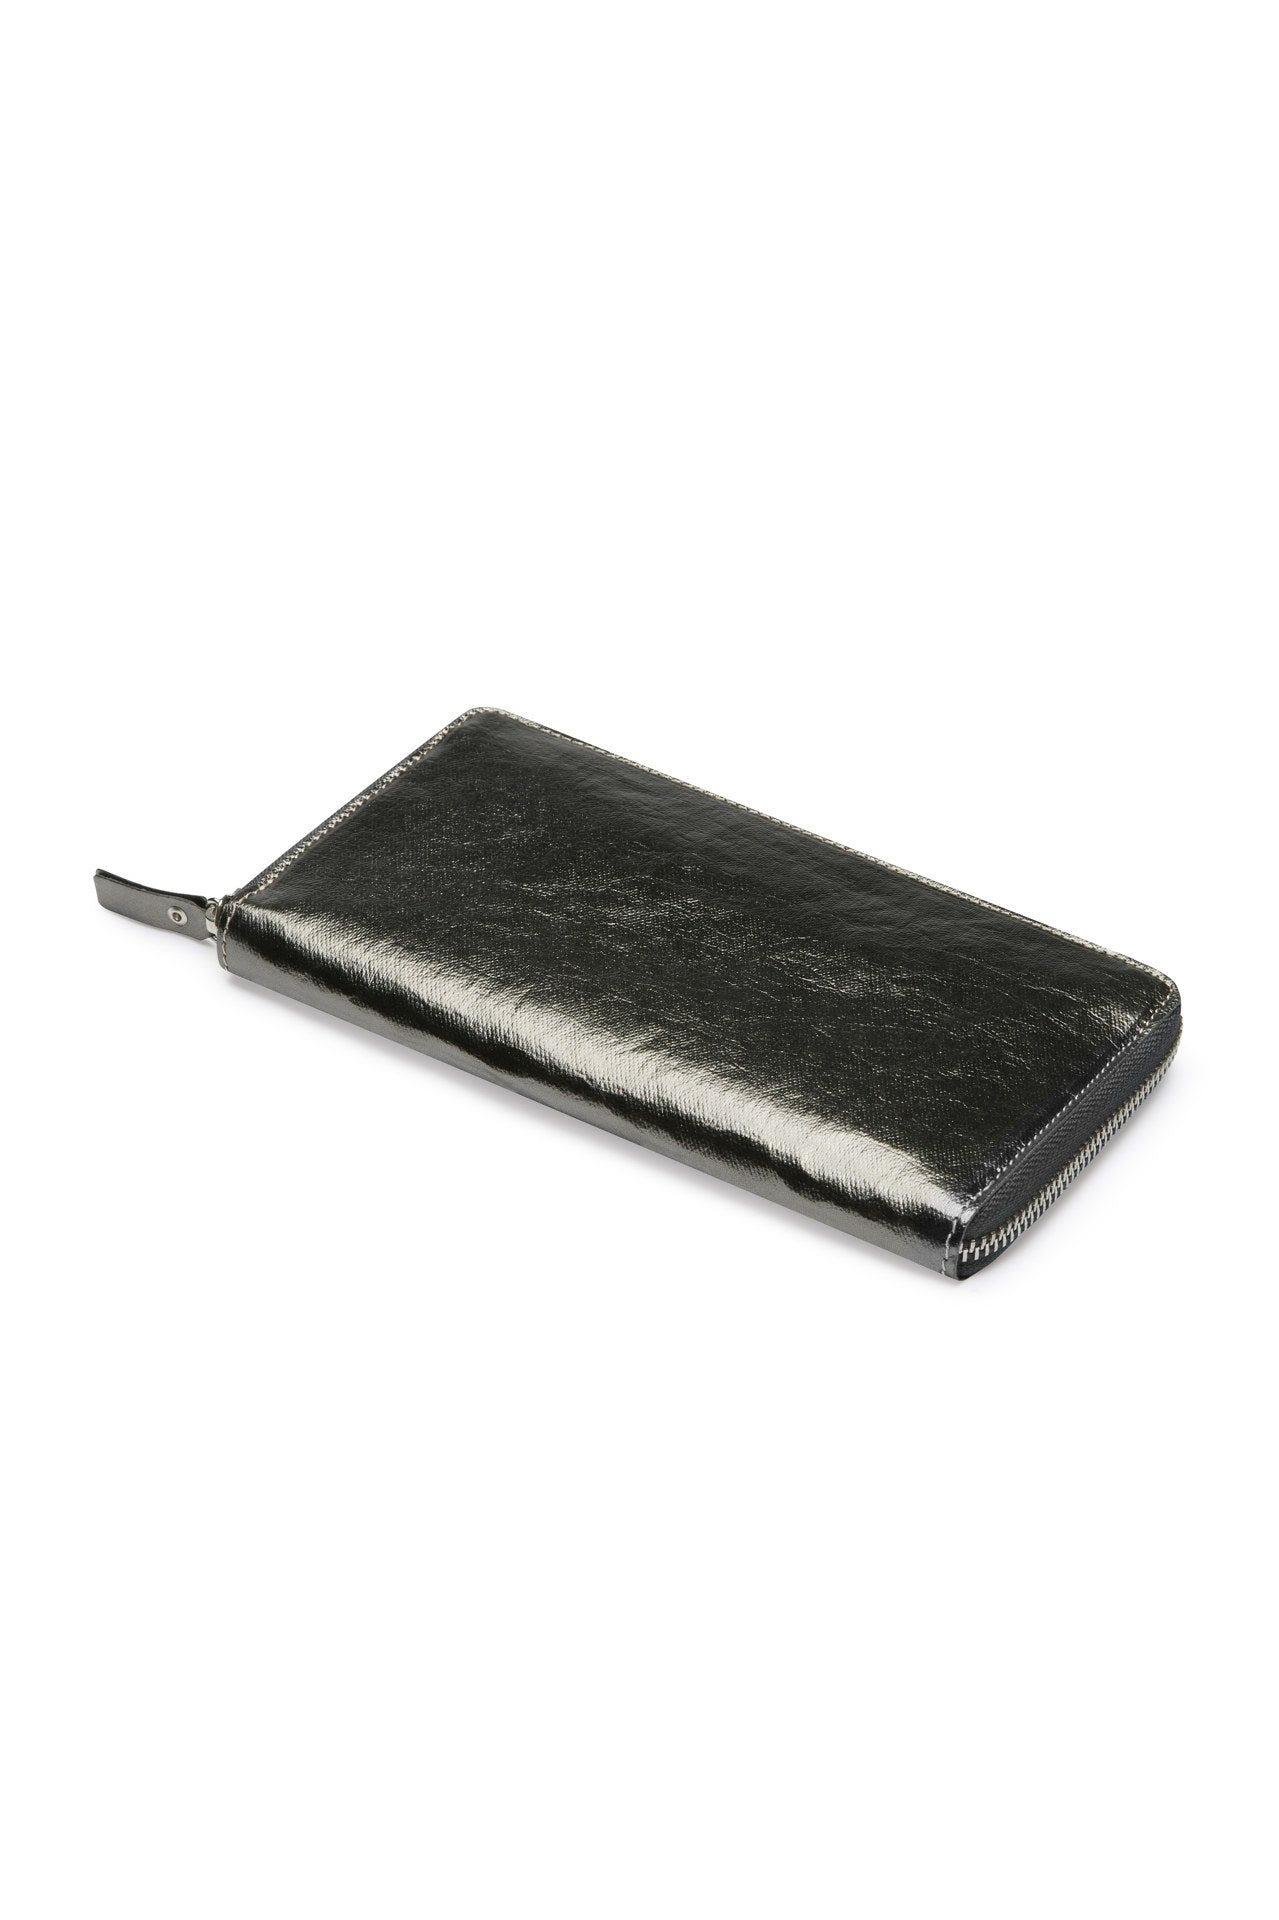 The outside of a large zippered washable paper wallet is shown. The image also shows a silver zip and washable paper zip pull. The wallet shown is metallic dark grey.